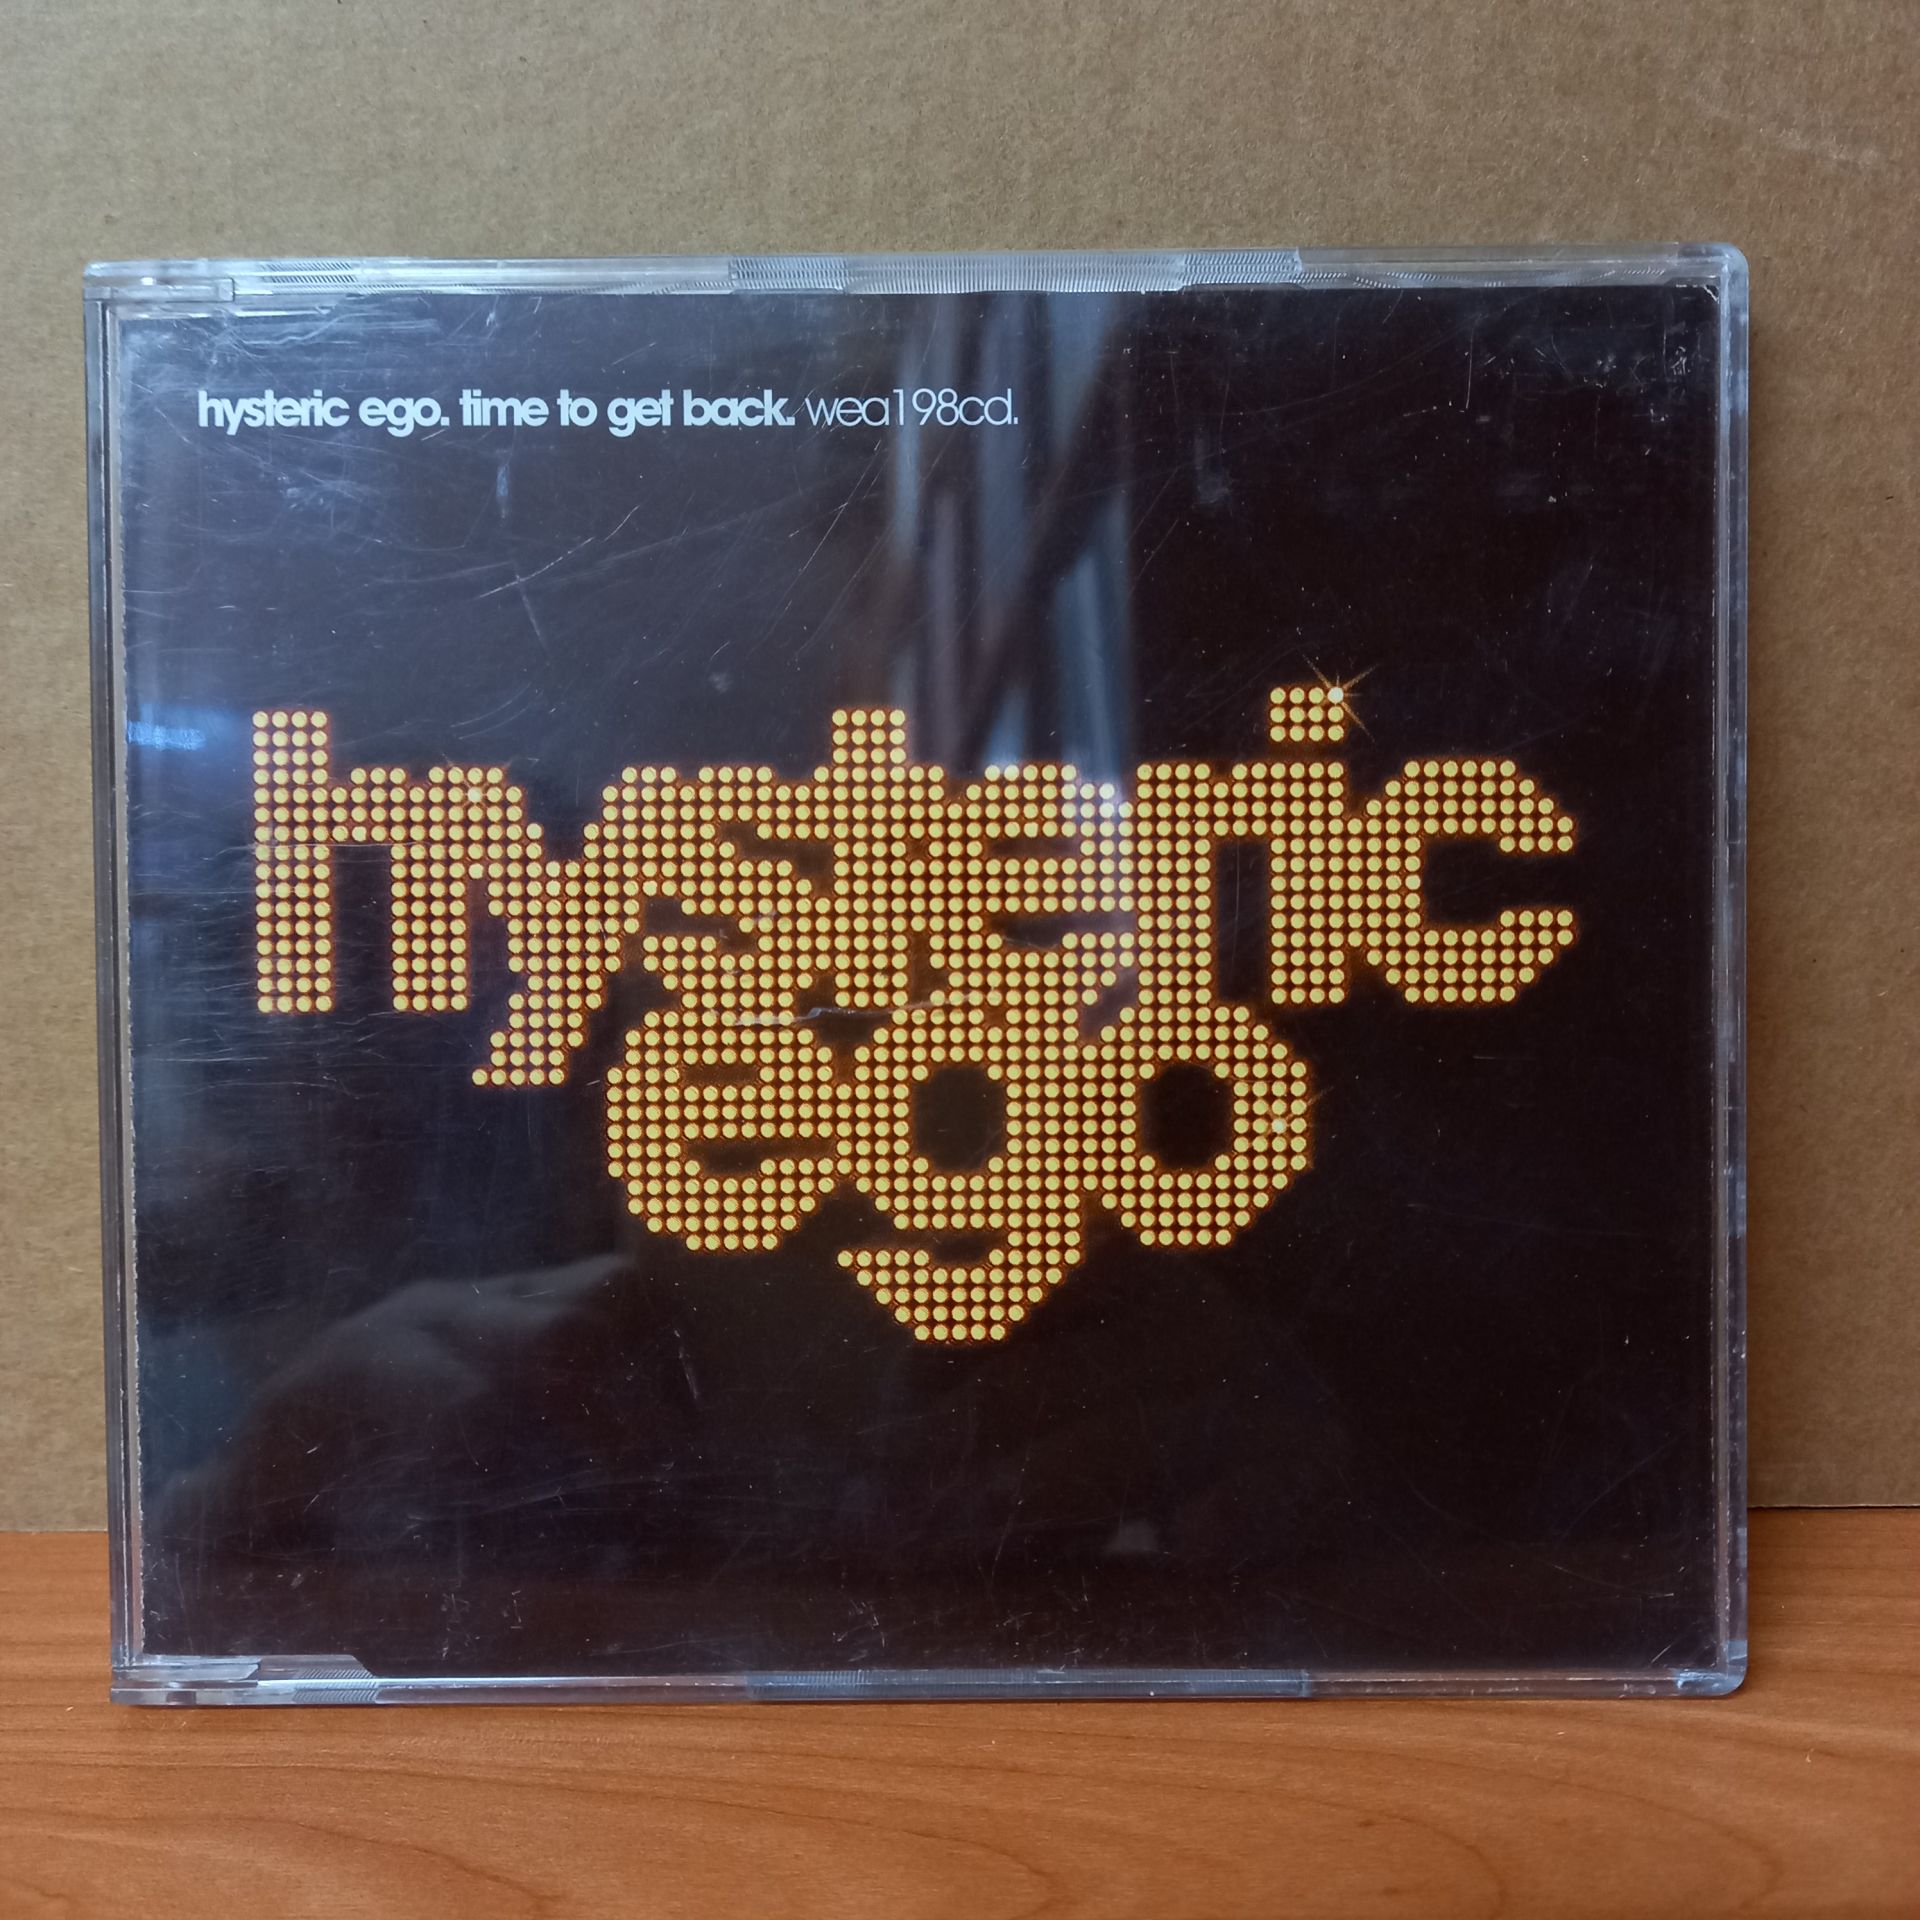 HYSTERIC EGO - TIME TO GET BACK (1998) - CD SINGLE 2.EL